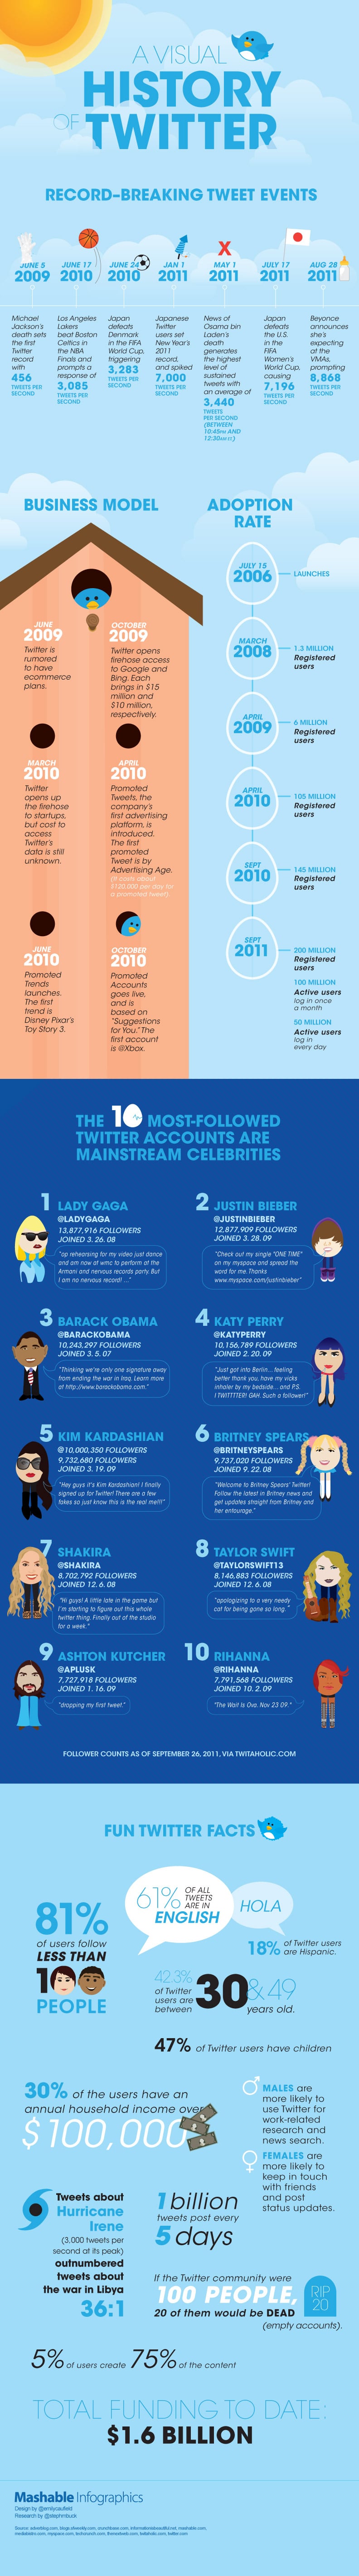 A Visual History Of Twitter [Infographic]